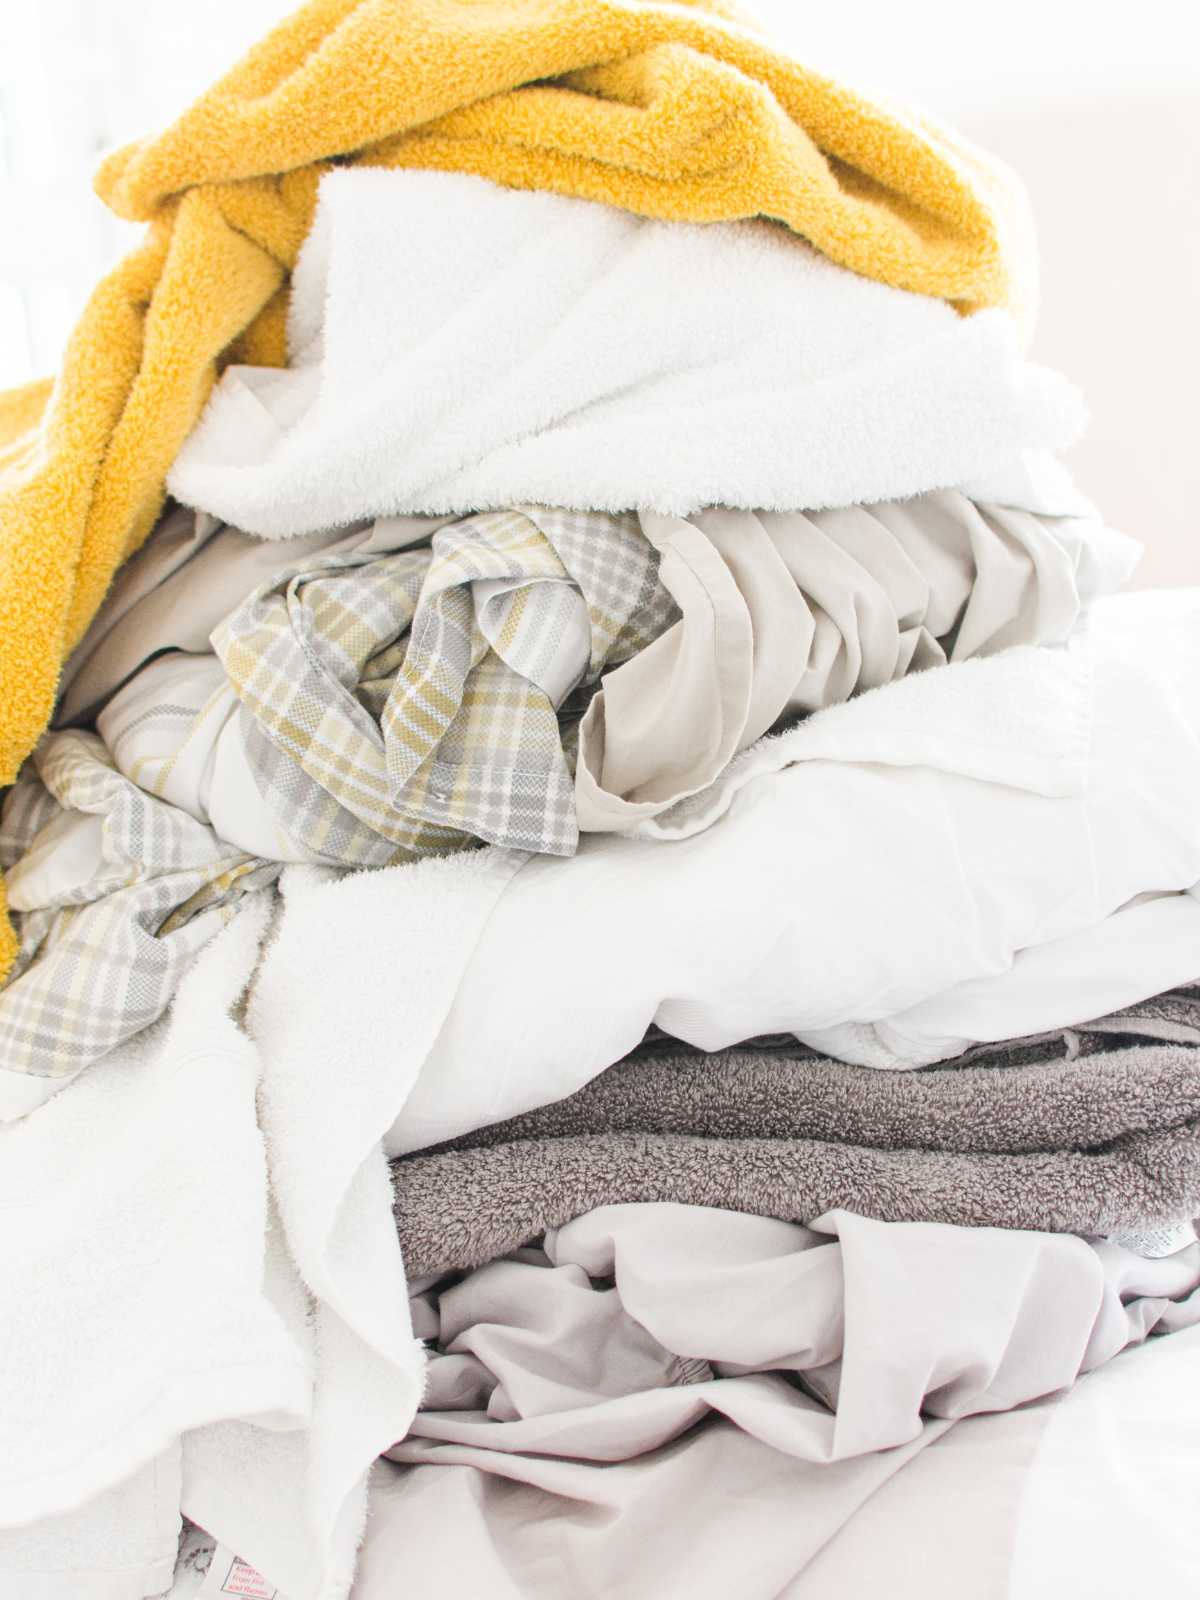 If you're looking for tips on how to remove stains from white clothes without washing, you've come to the right place. In this blog post, we'll share some of our best tips and tricks for getting rid of those pesky stains. So, whether you're dealing with a coffee stain or a grass stain, we've got you covered.